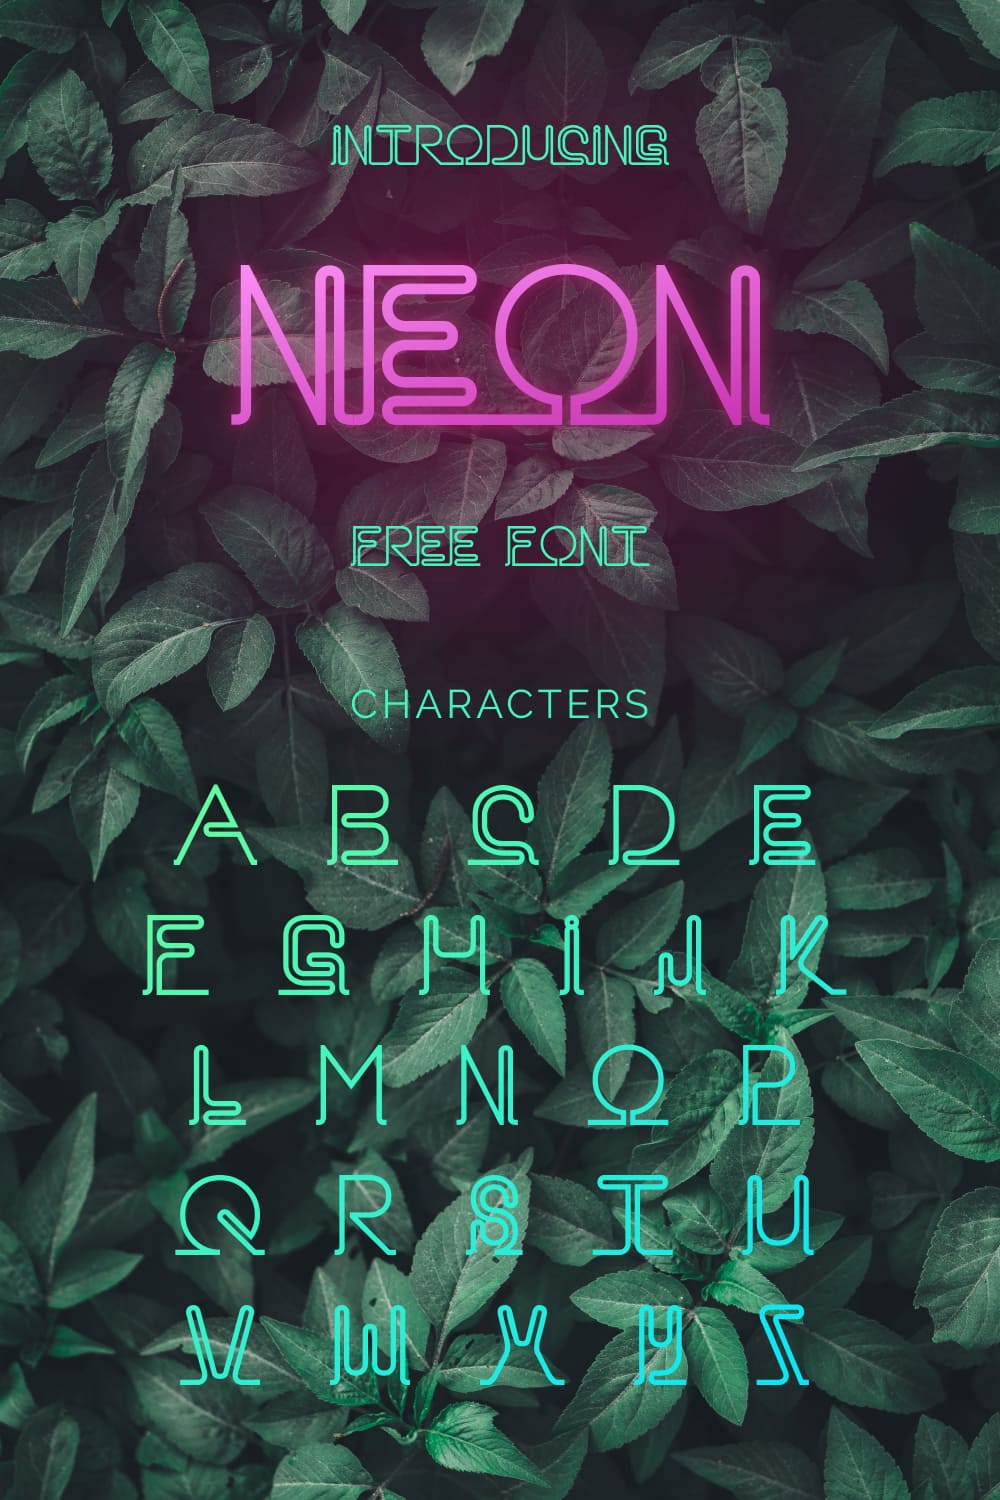 Pinterest Alphabet preview example for neon font free by MasterBundles.